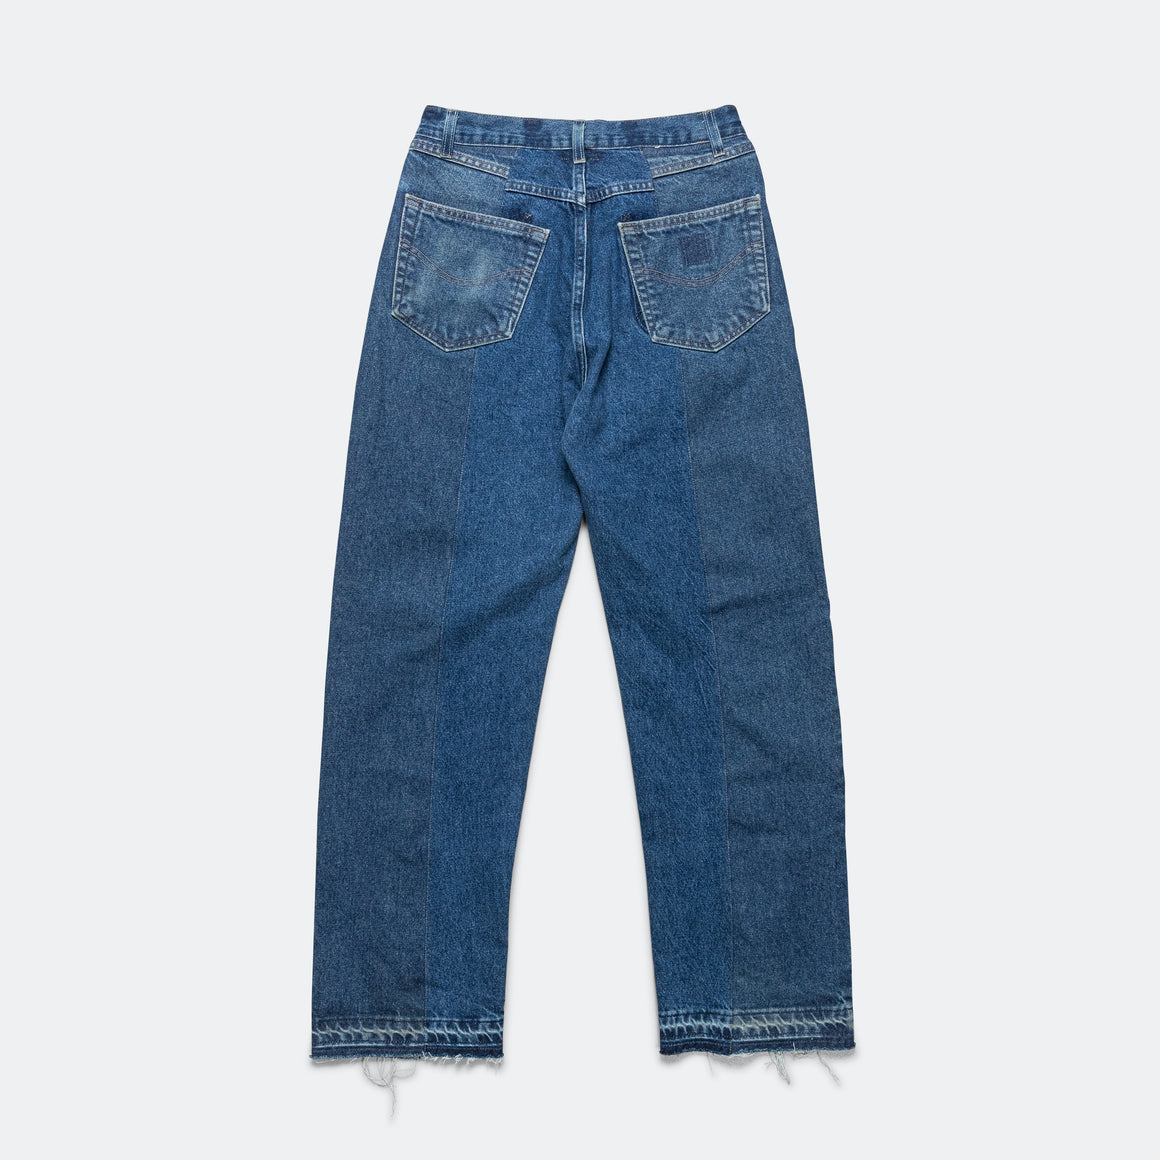 Kartik Research - Double Knee Upcycled Denim - Indigo 32" - UP THERE